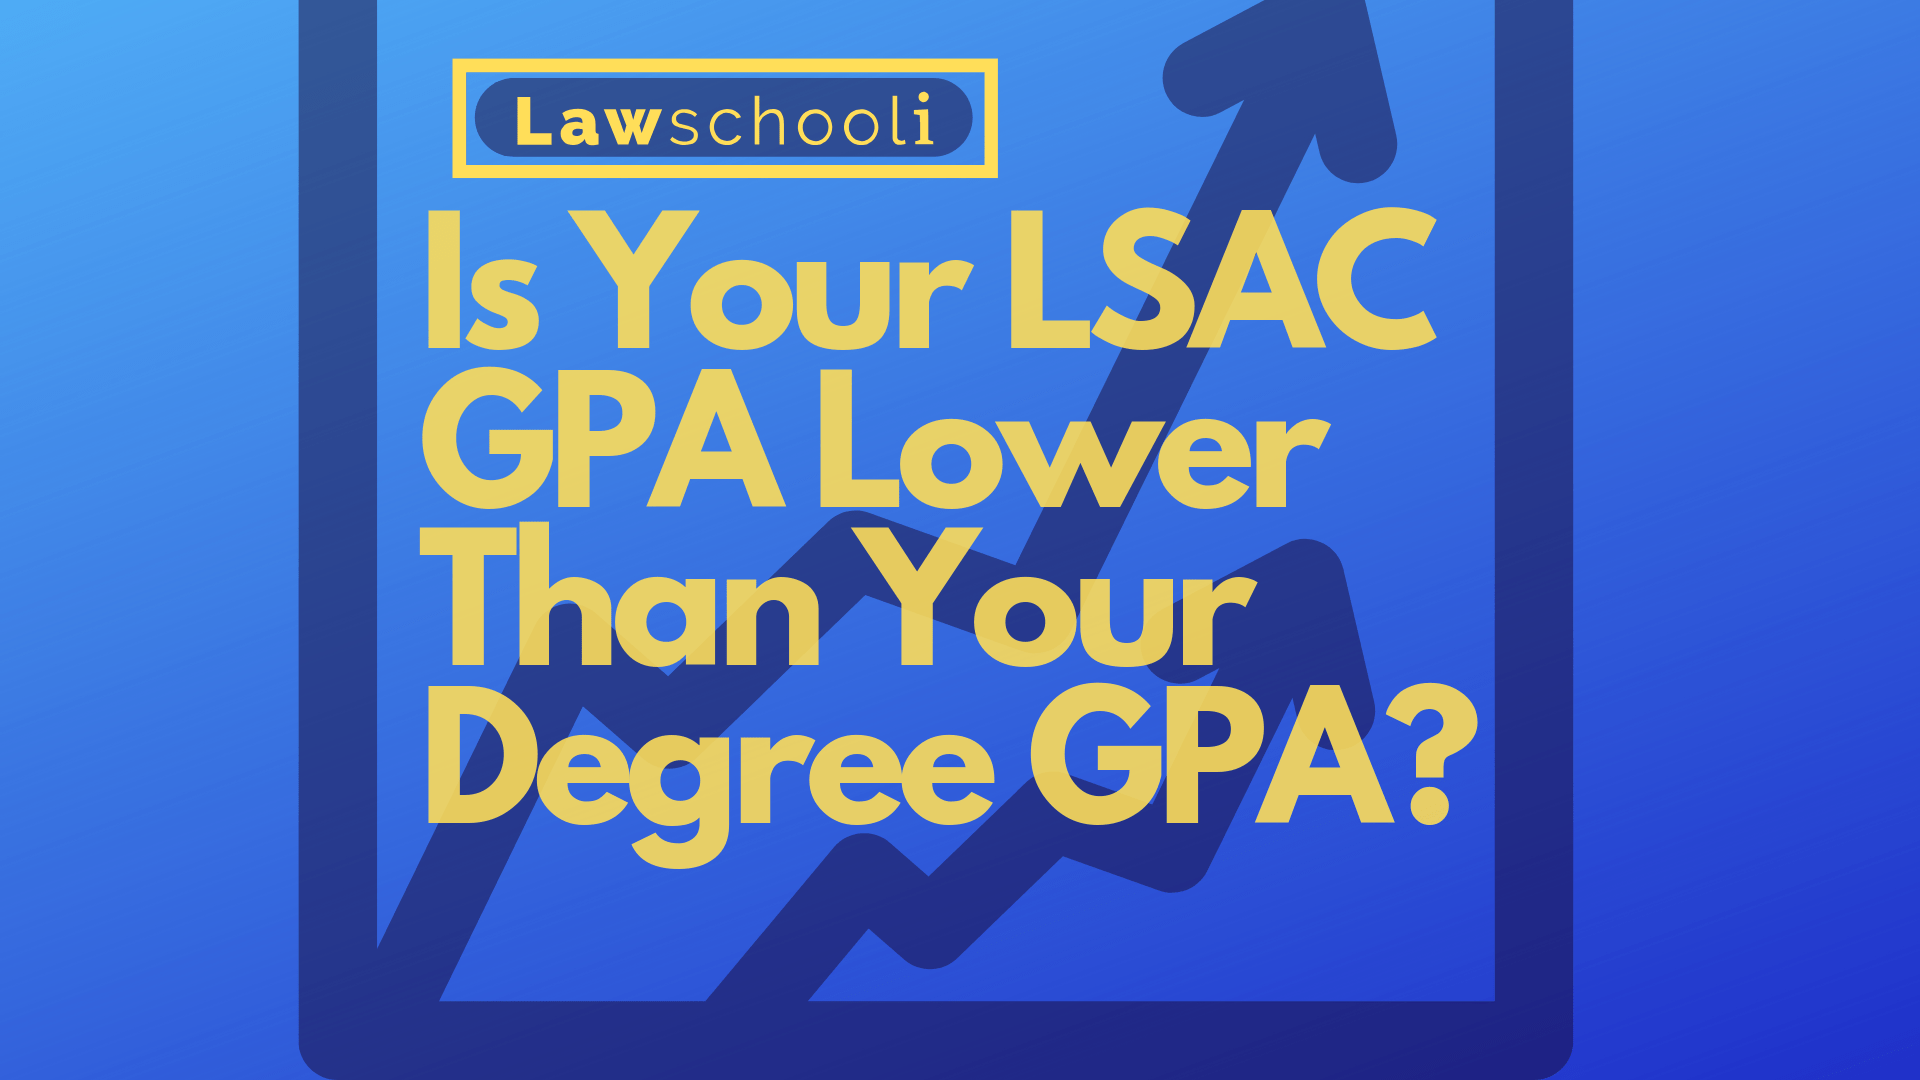 Is Your LSAC GPA Lower Than Your Degree GPA? - LawSchooli